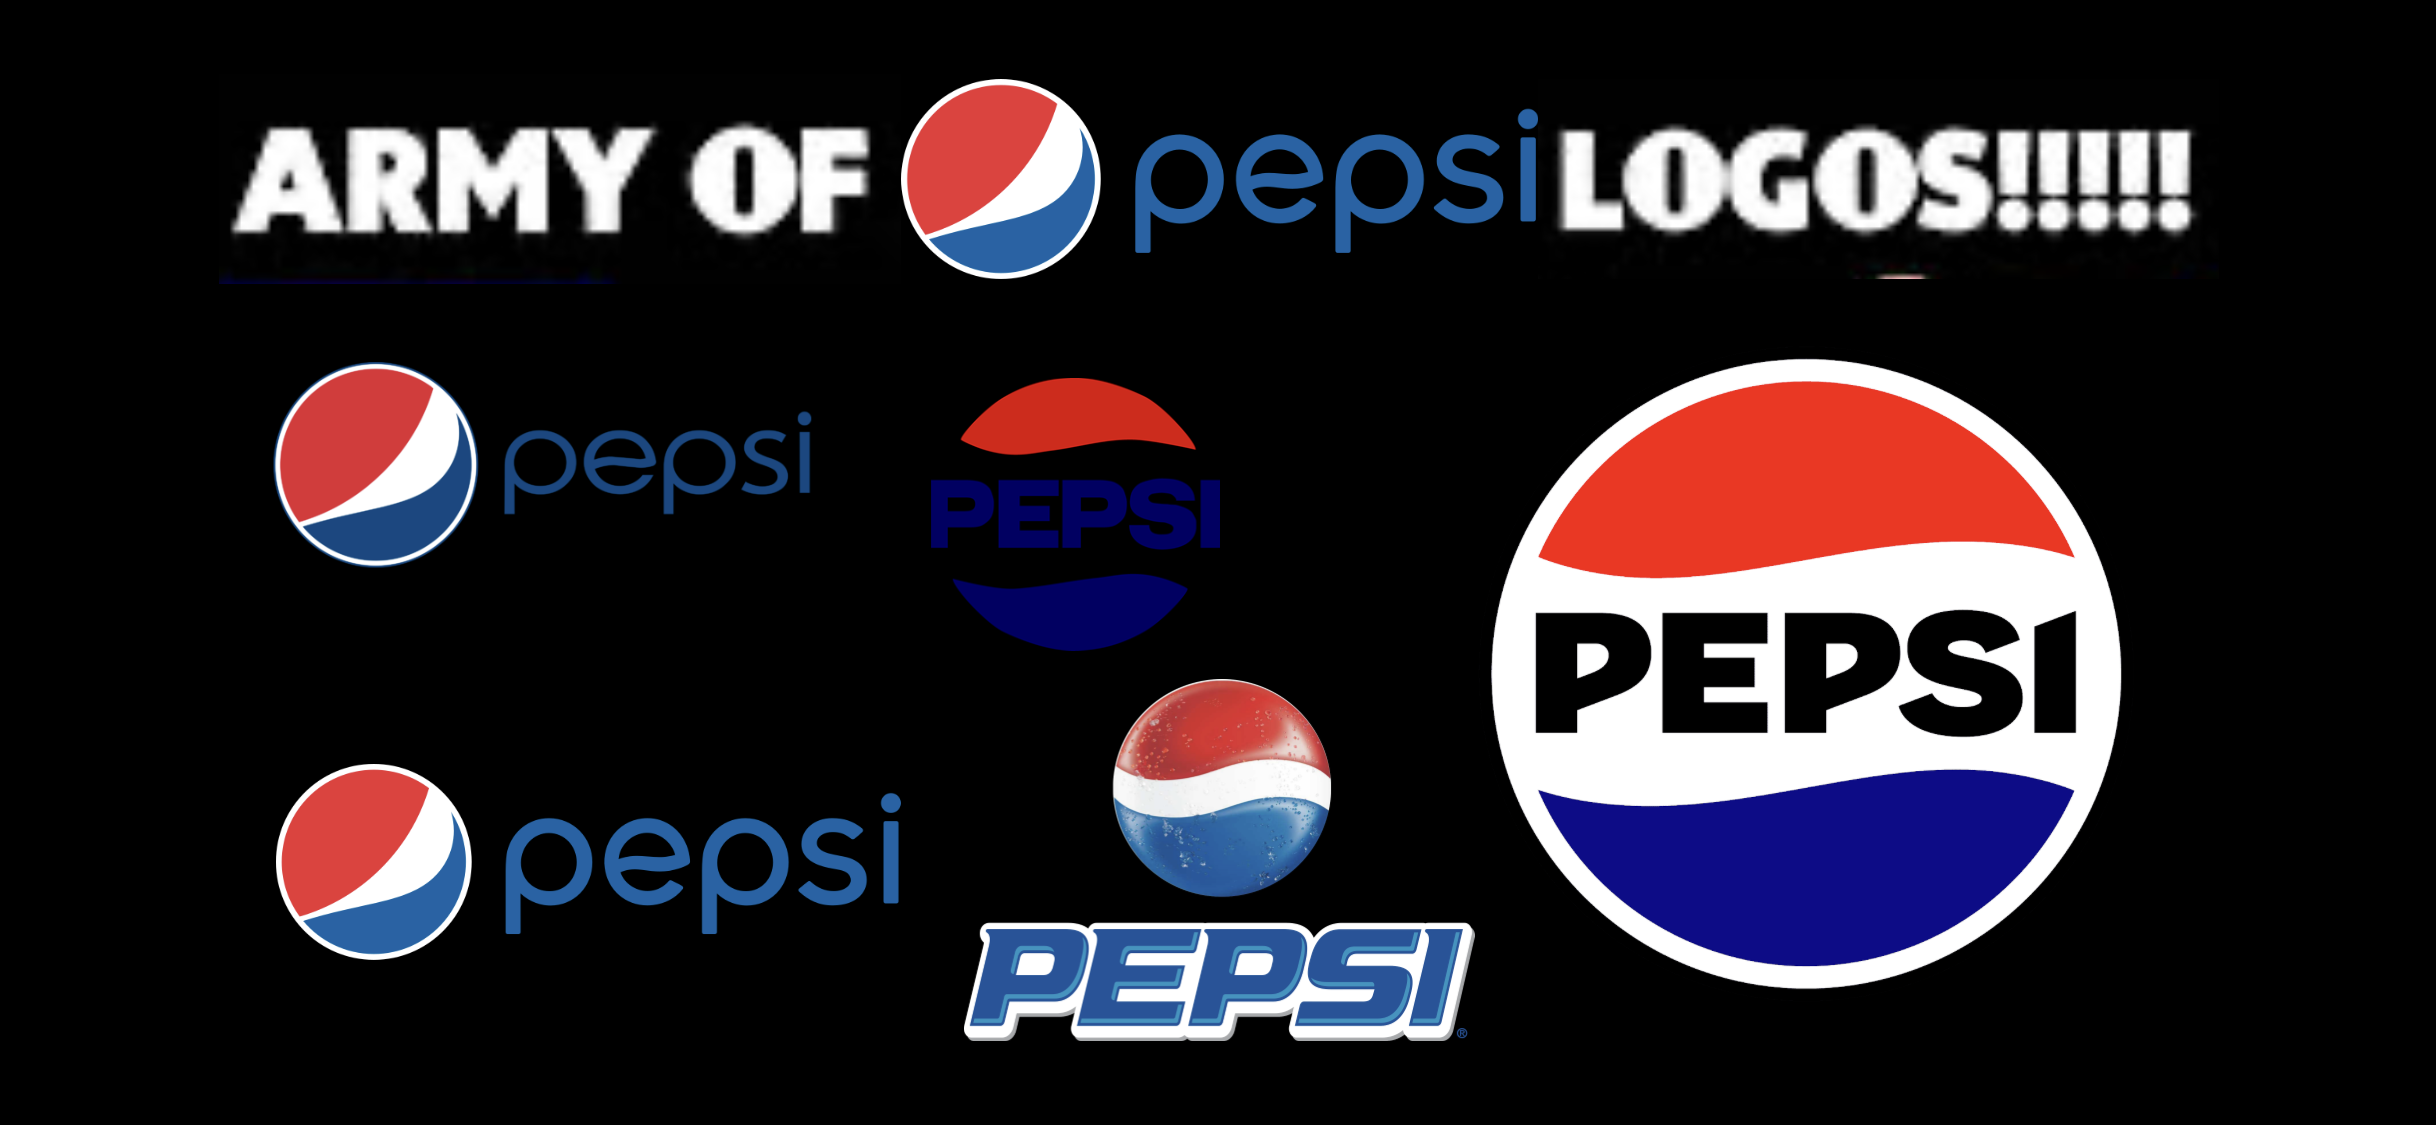 Army of Pepsi Logos by Lococrazy30 on DeviantArt